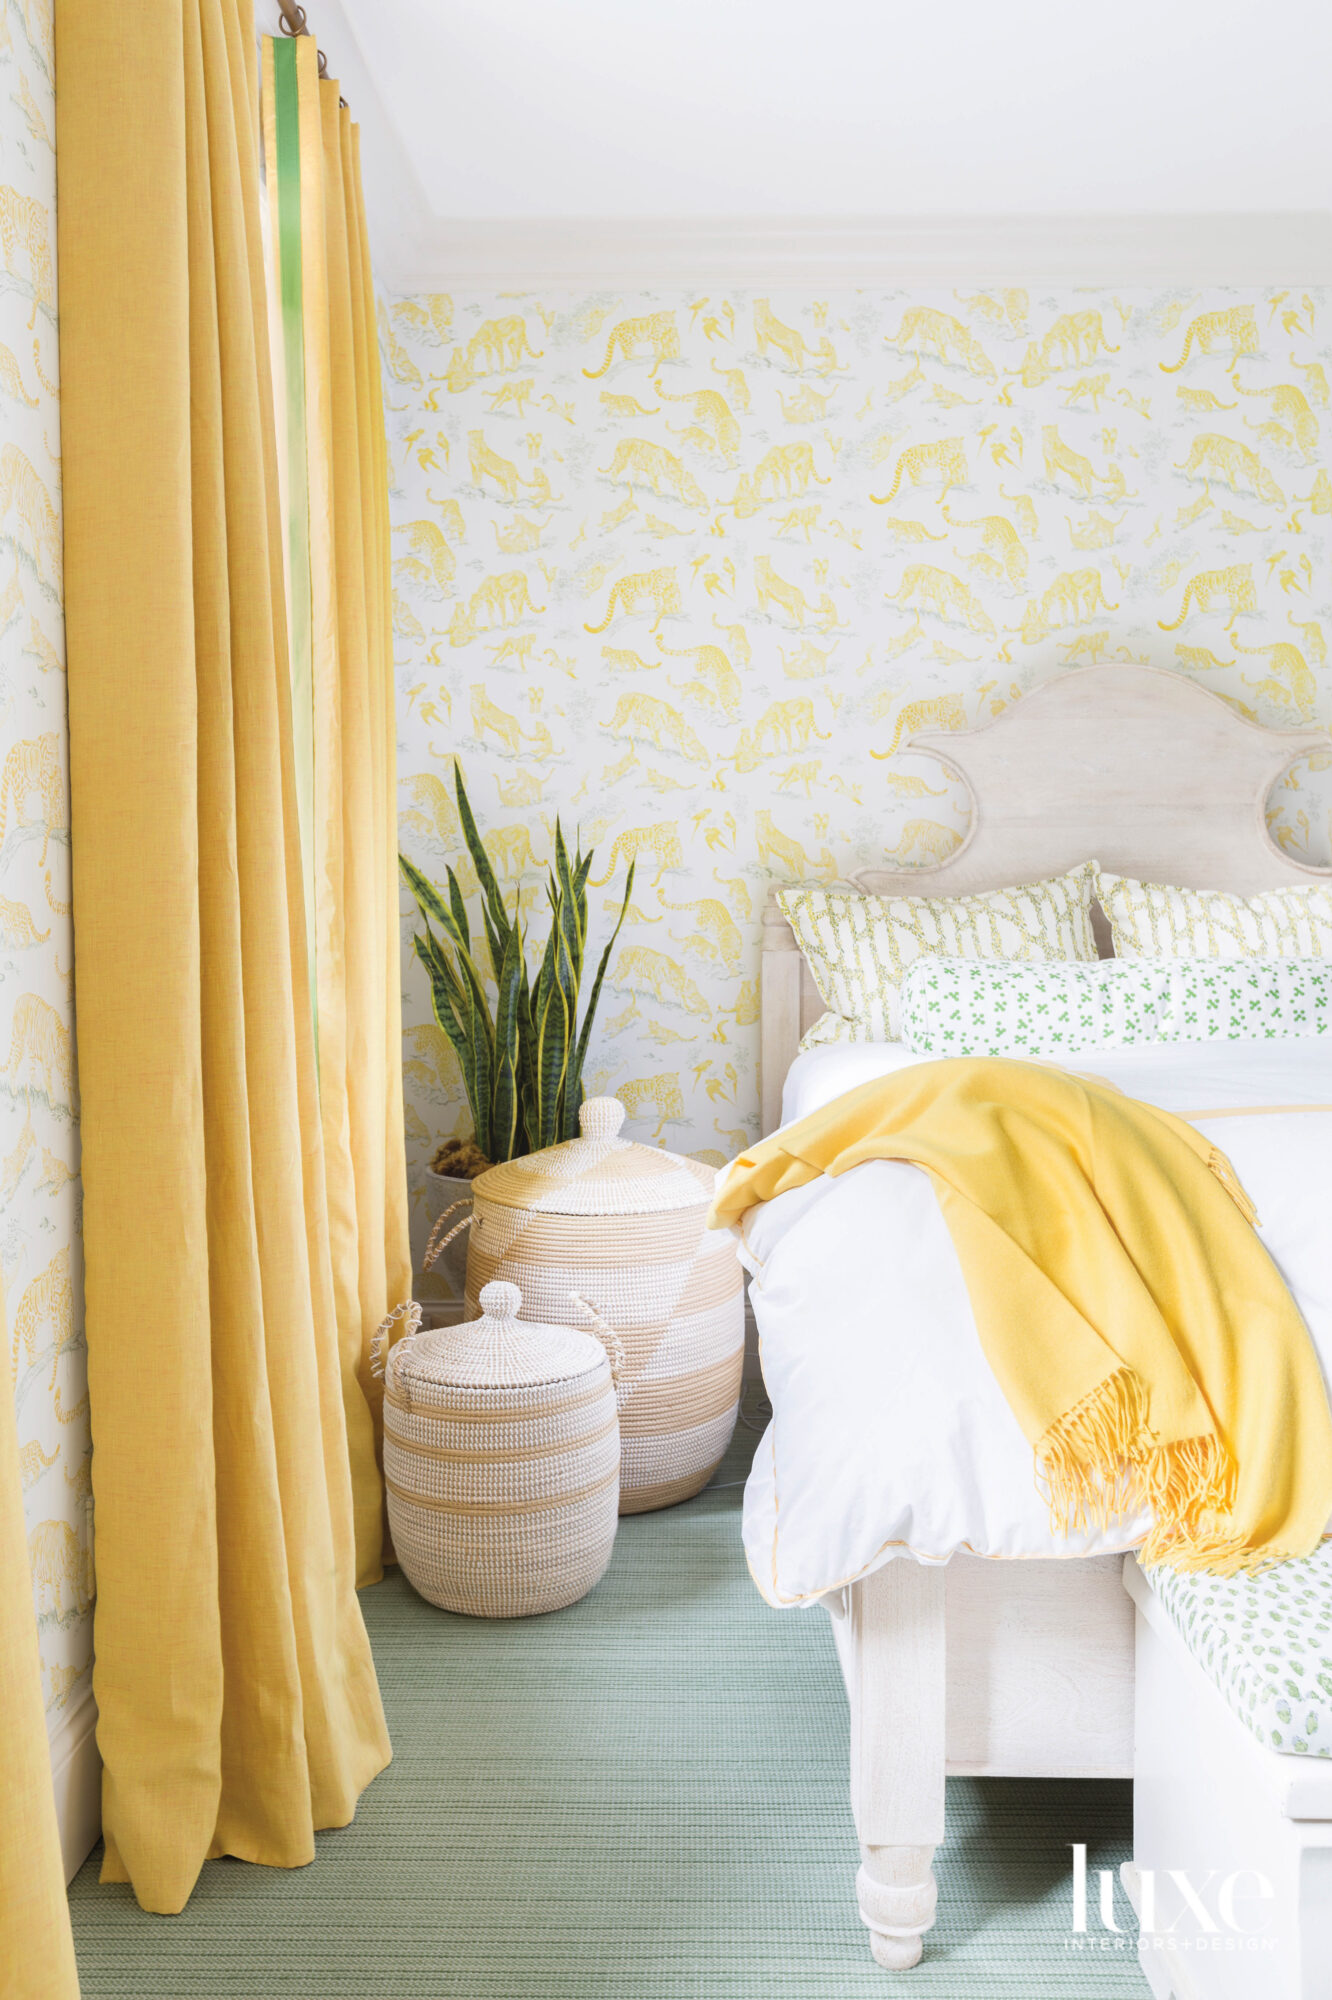 Photo of bed with yellow draperies and woven baskets